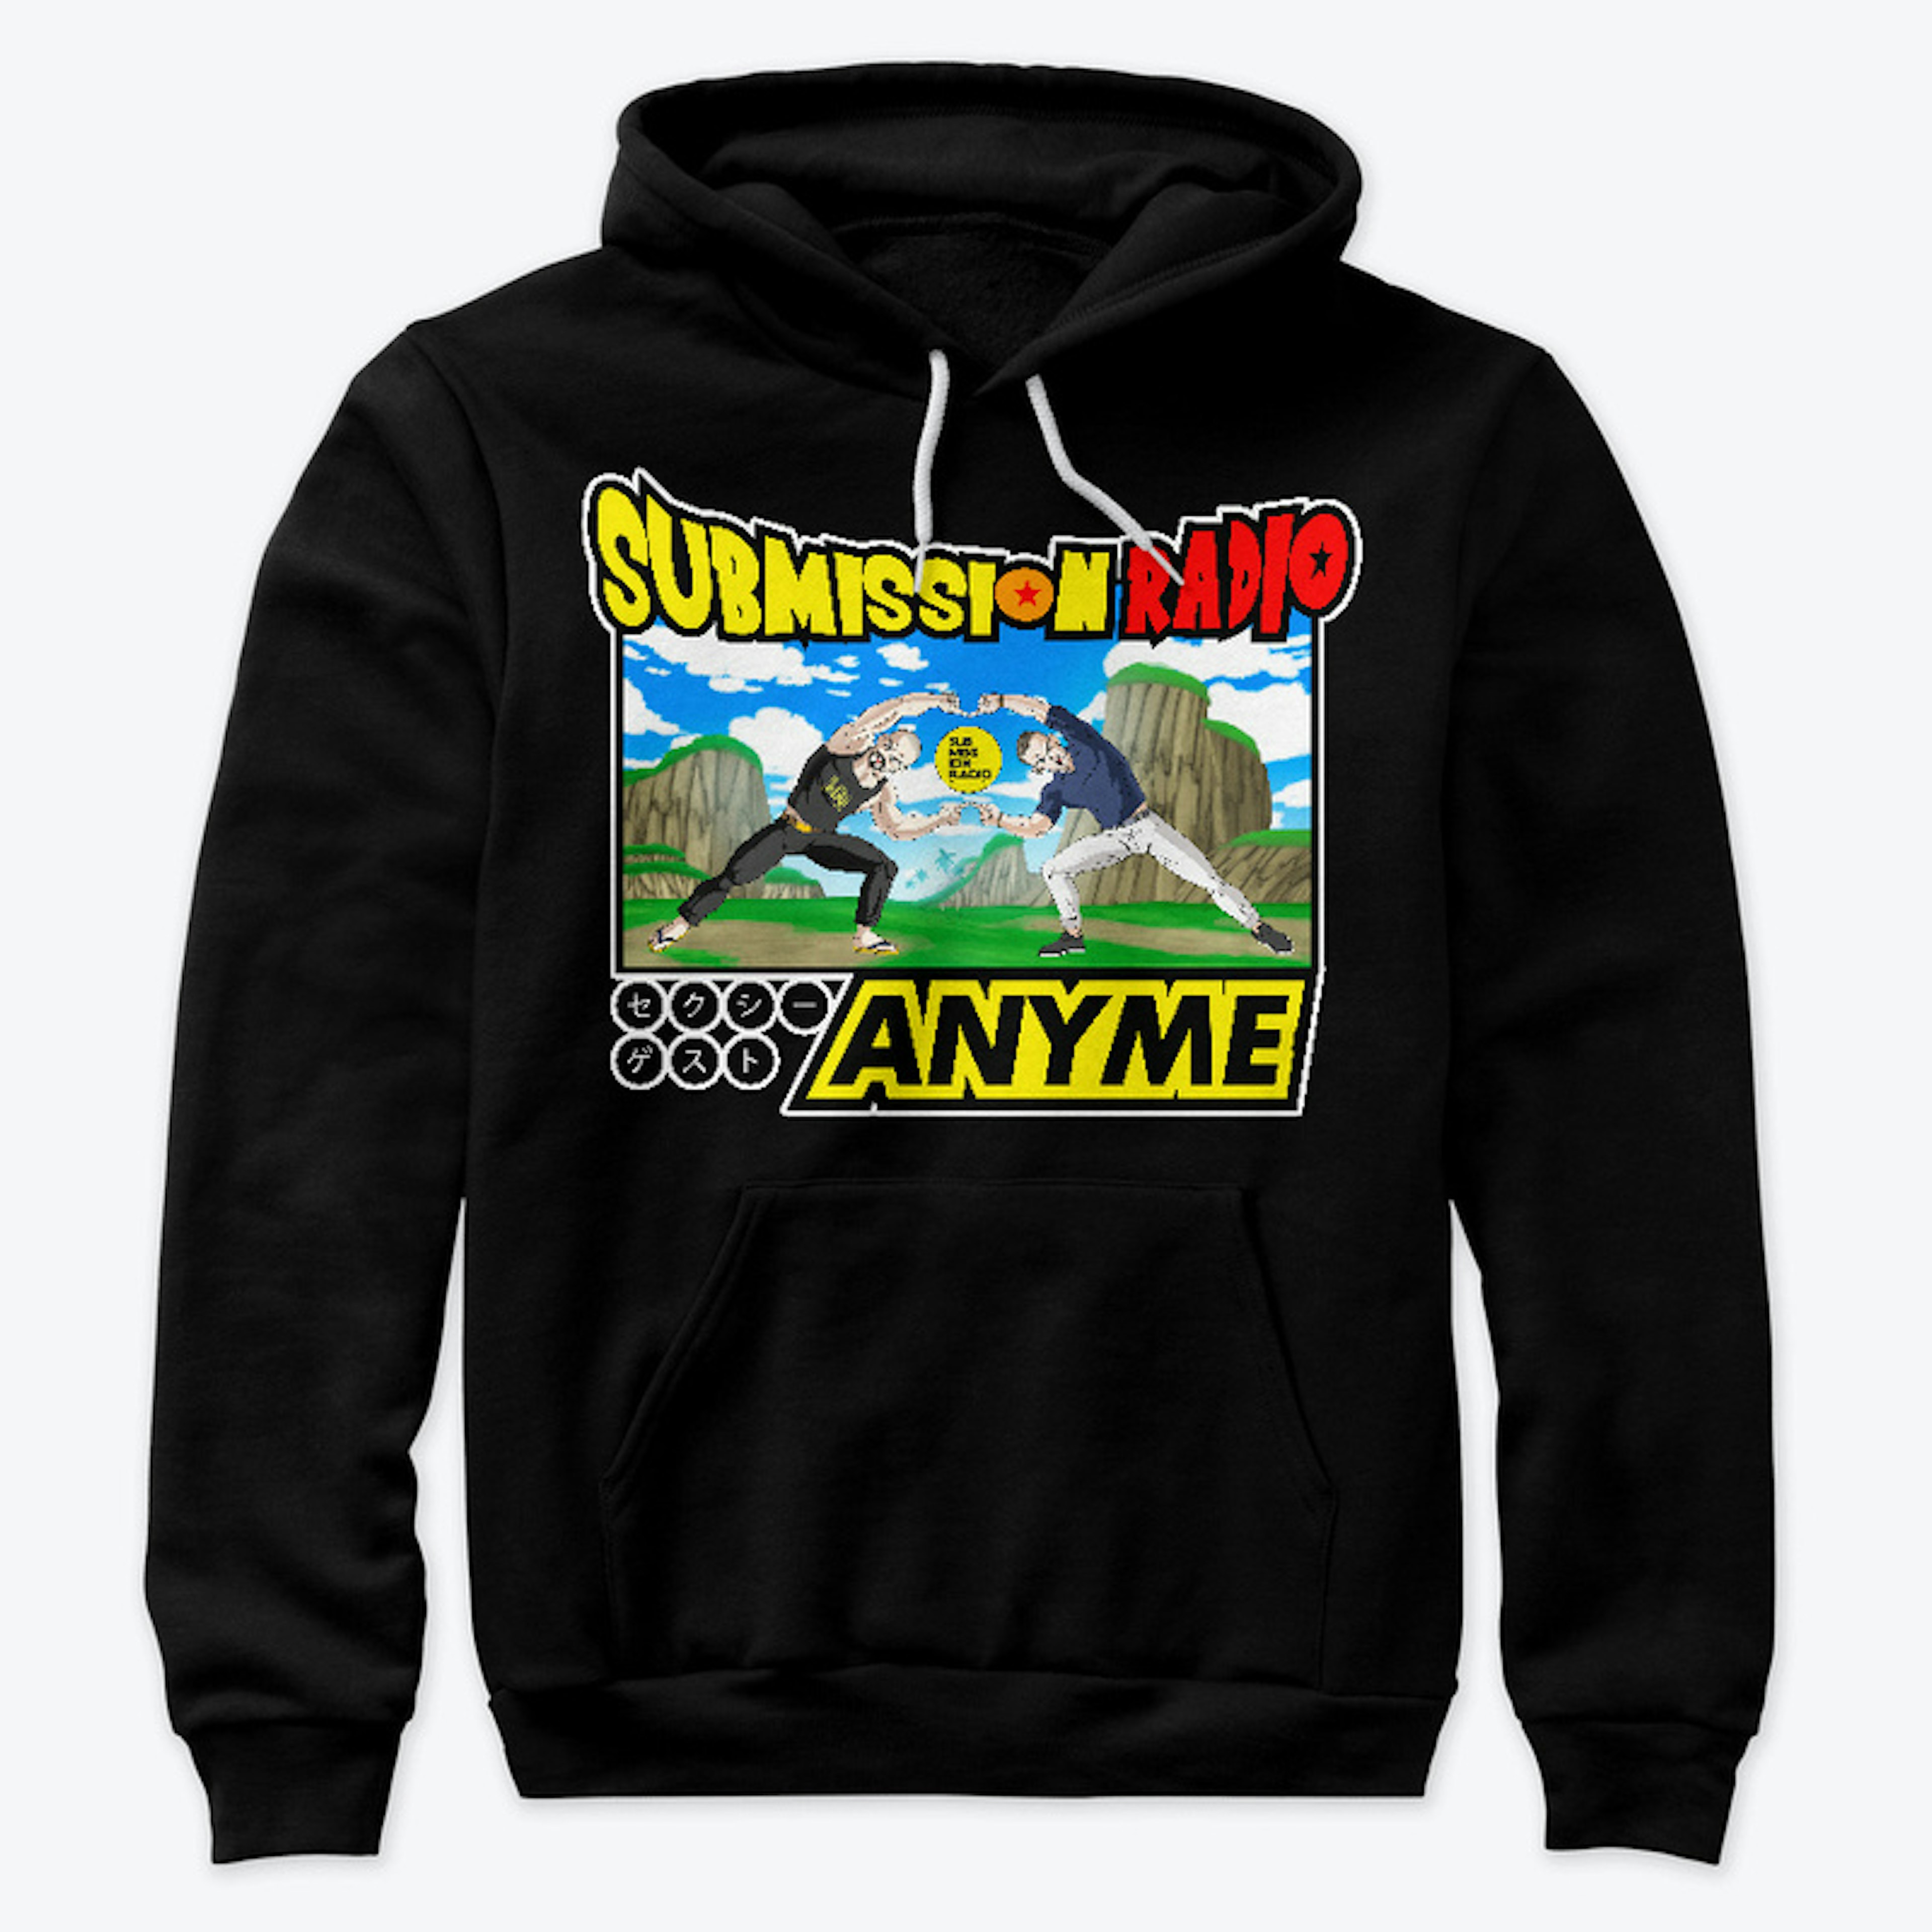 Submission Radio Anyme Apparel